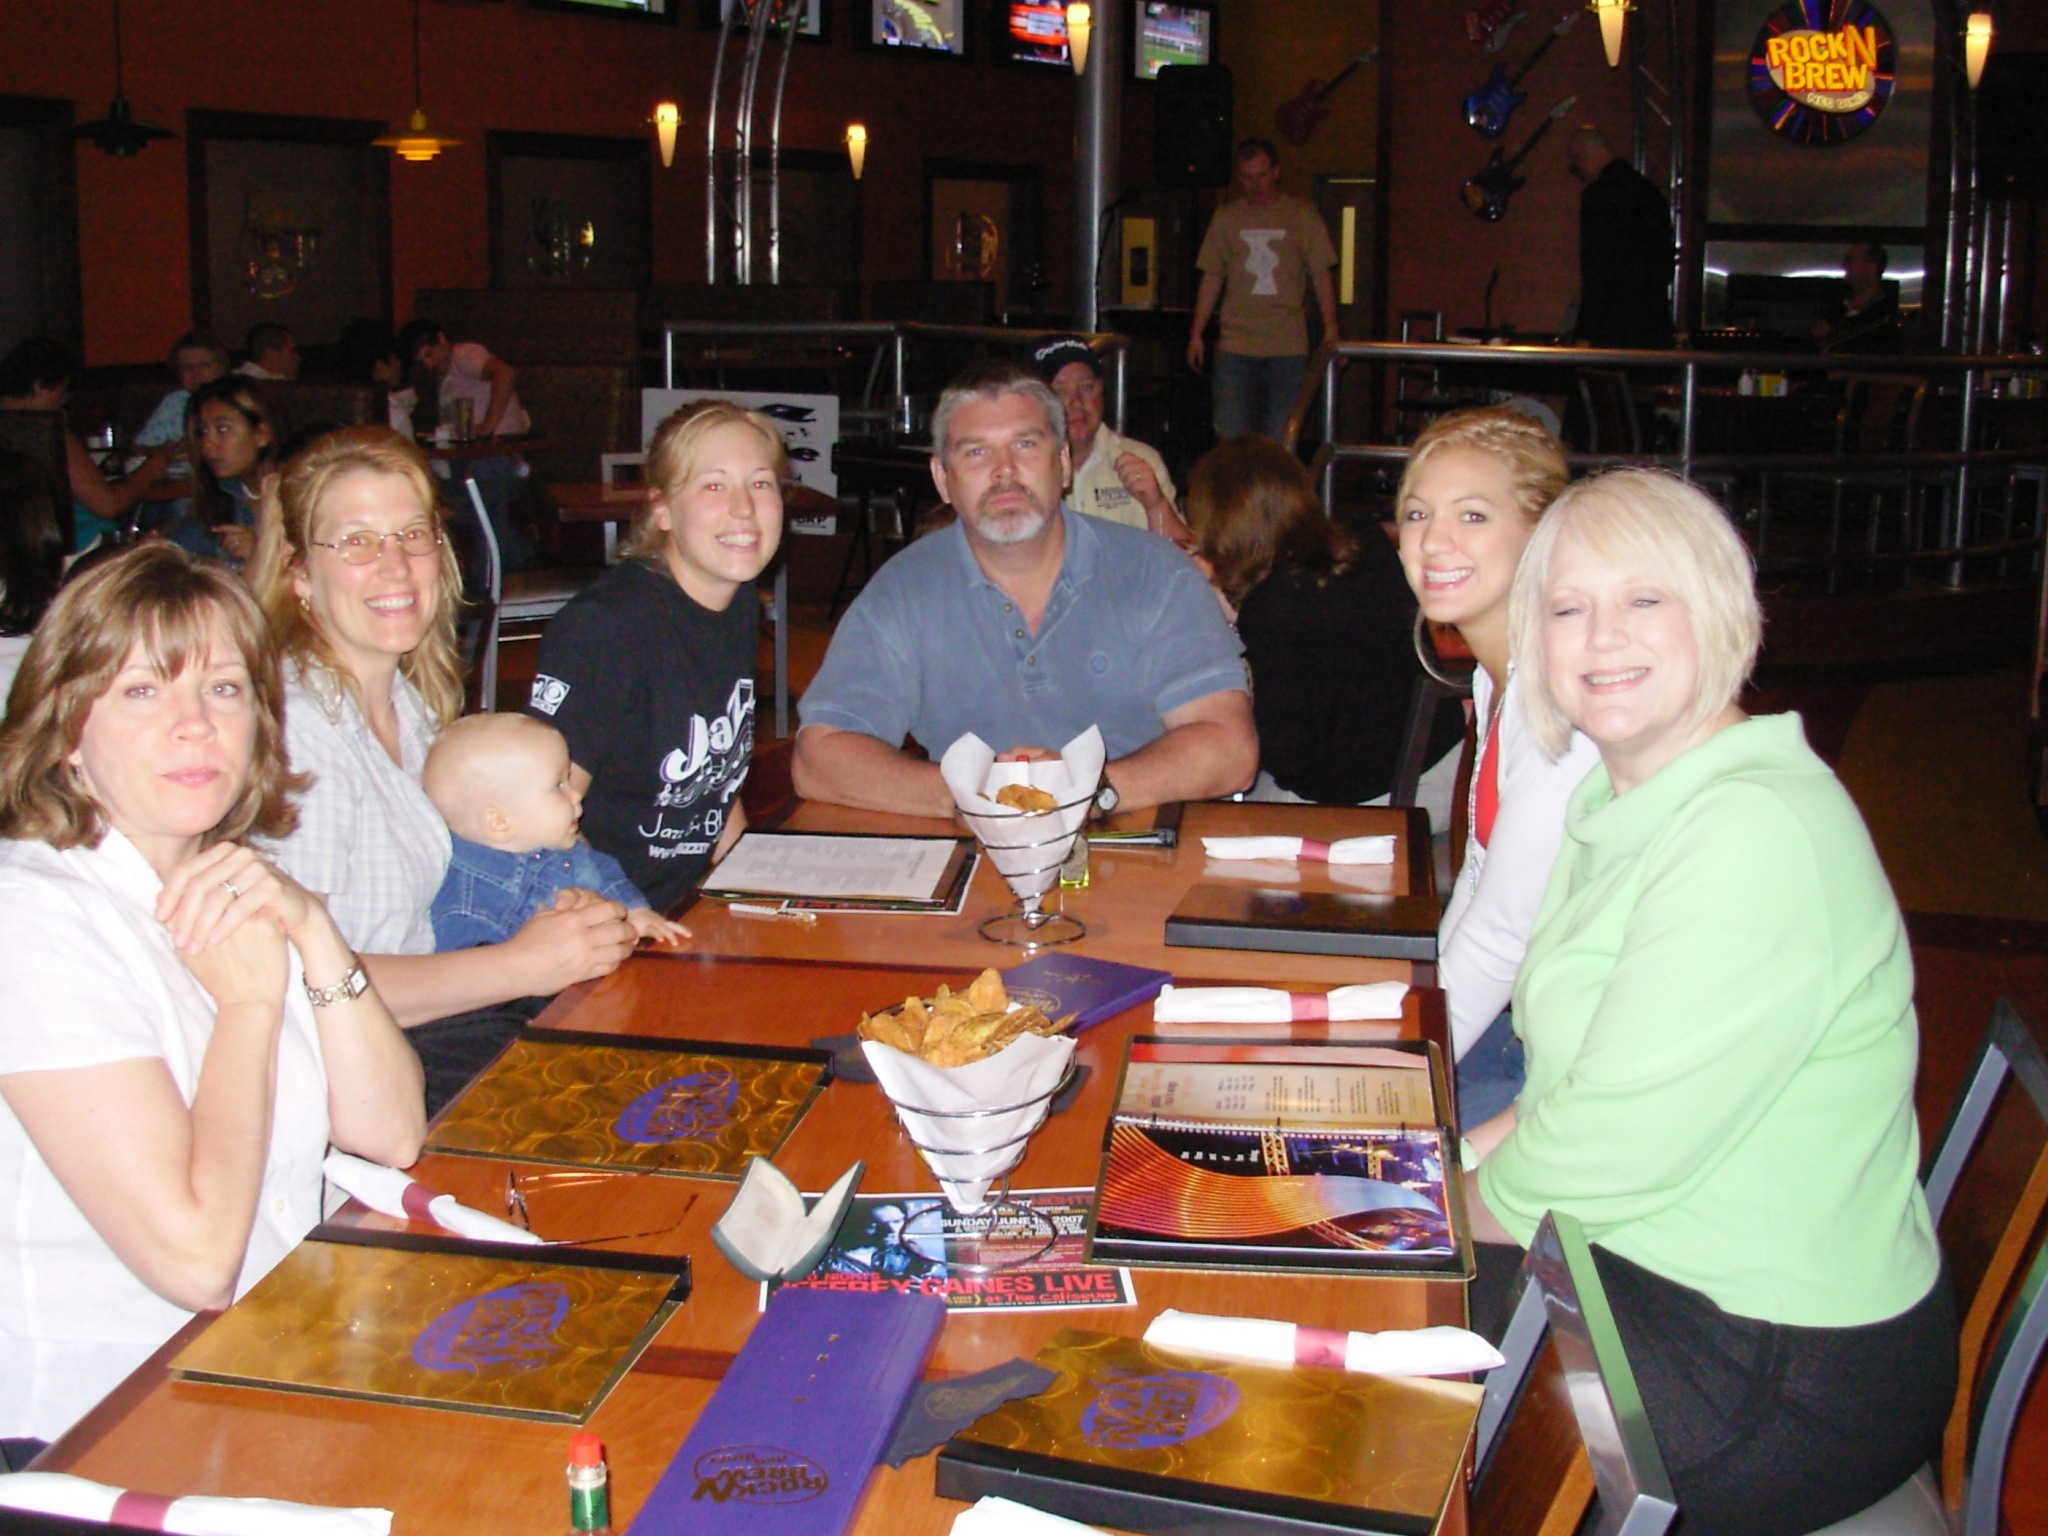 Well wishers & family at the Coliseum Rock-N-Brew
